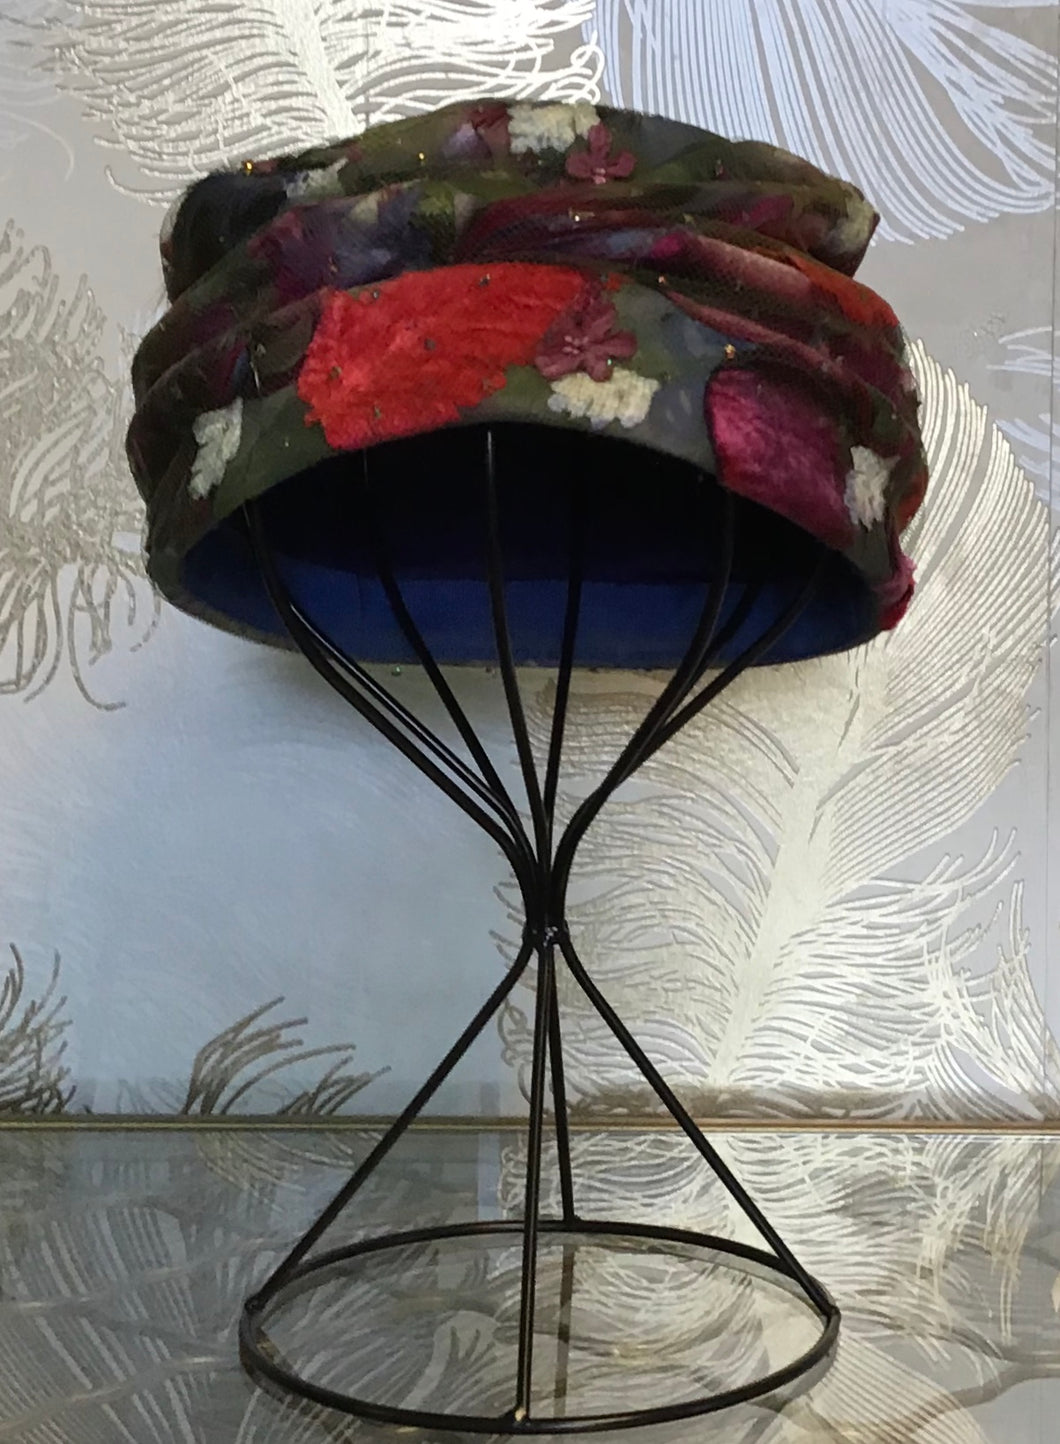 Floral & Feather Beehive Turban Hat